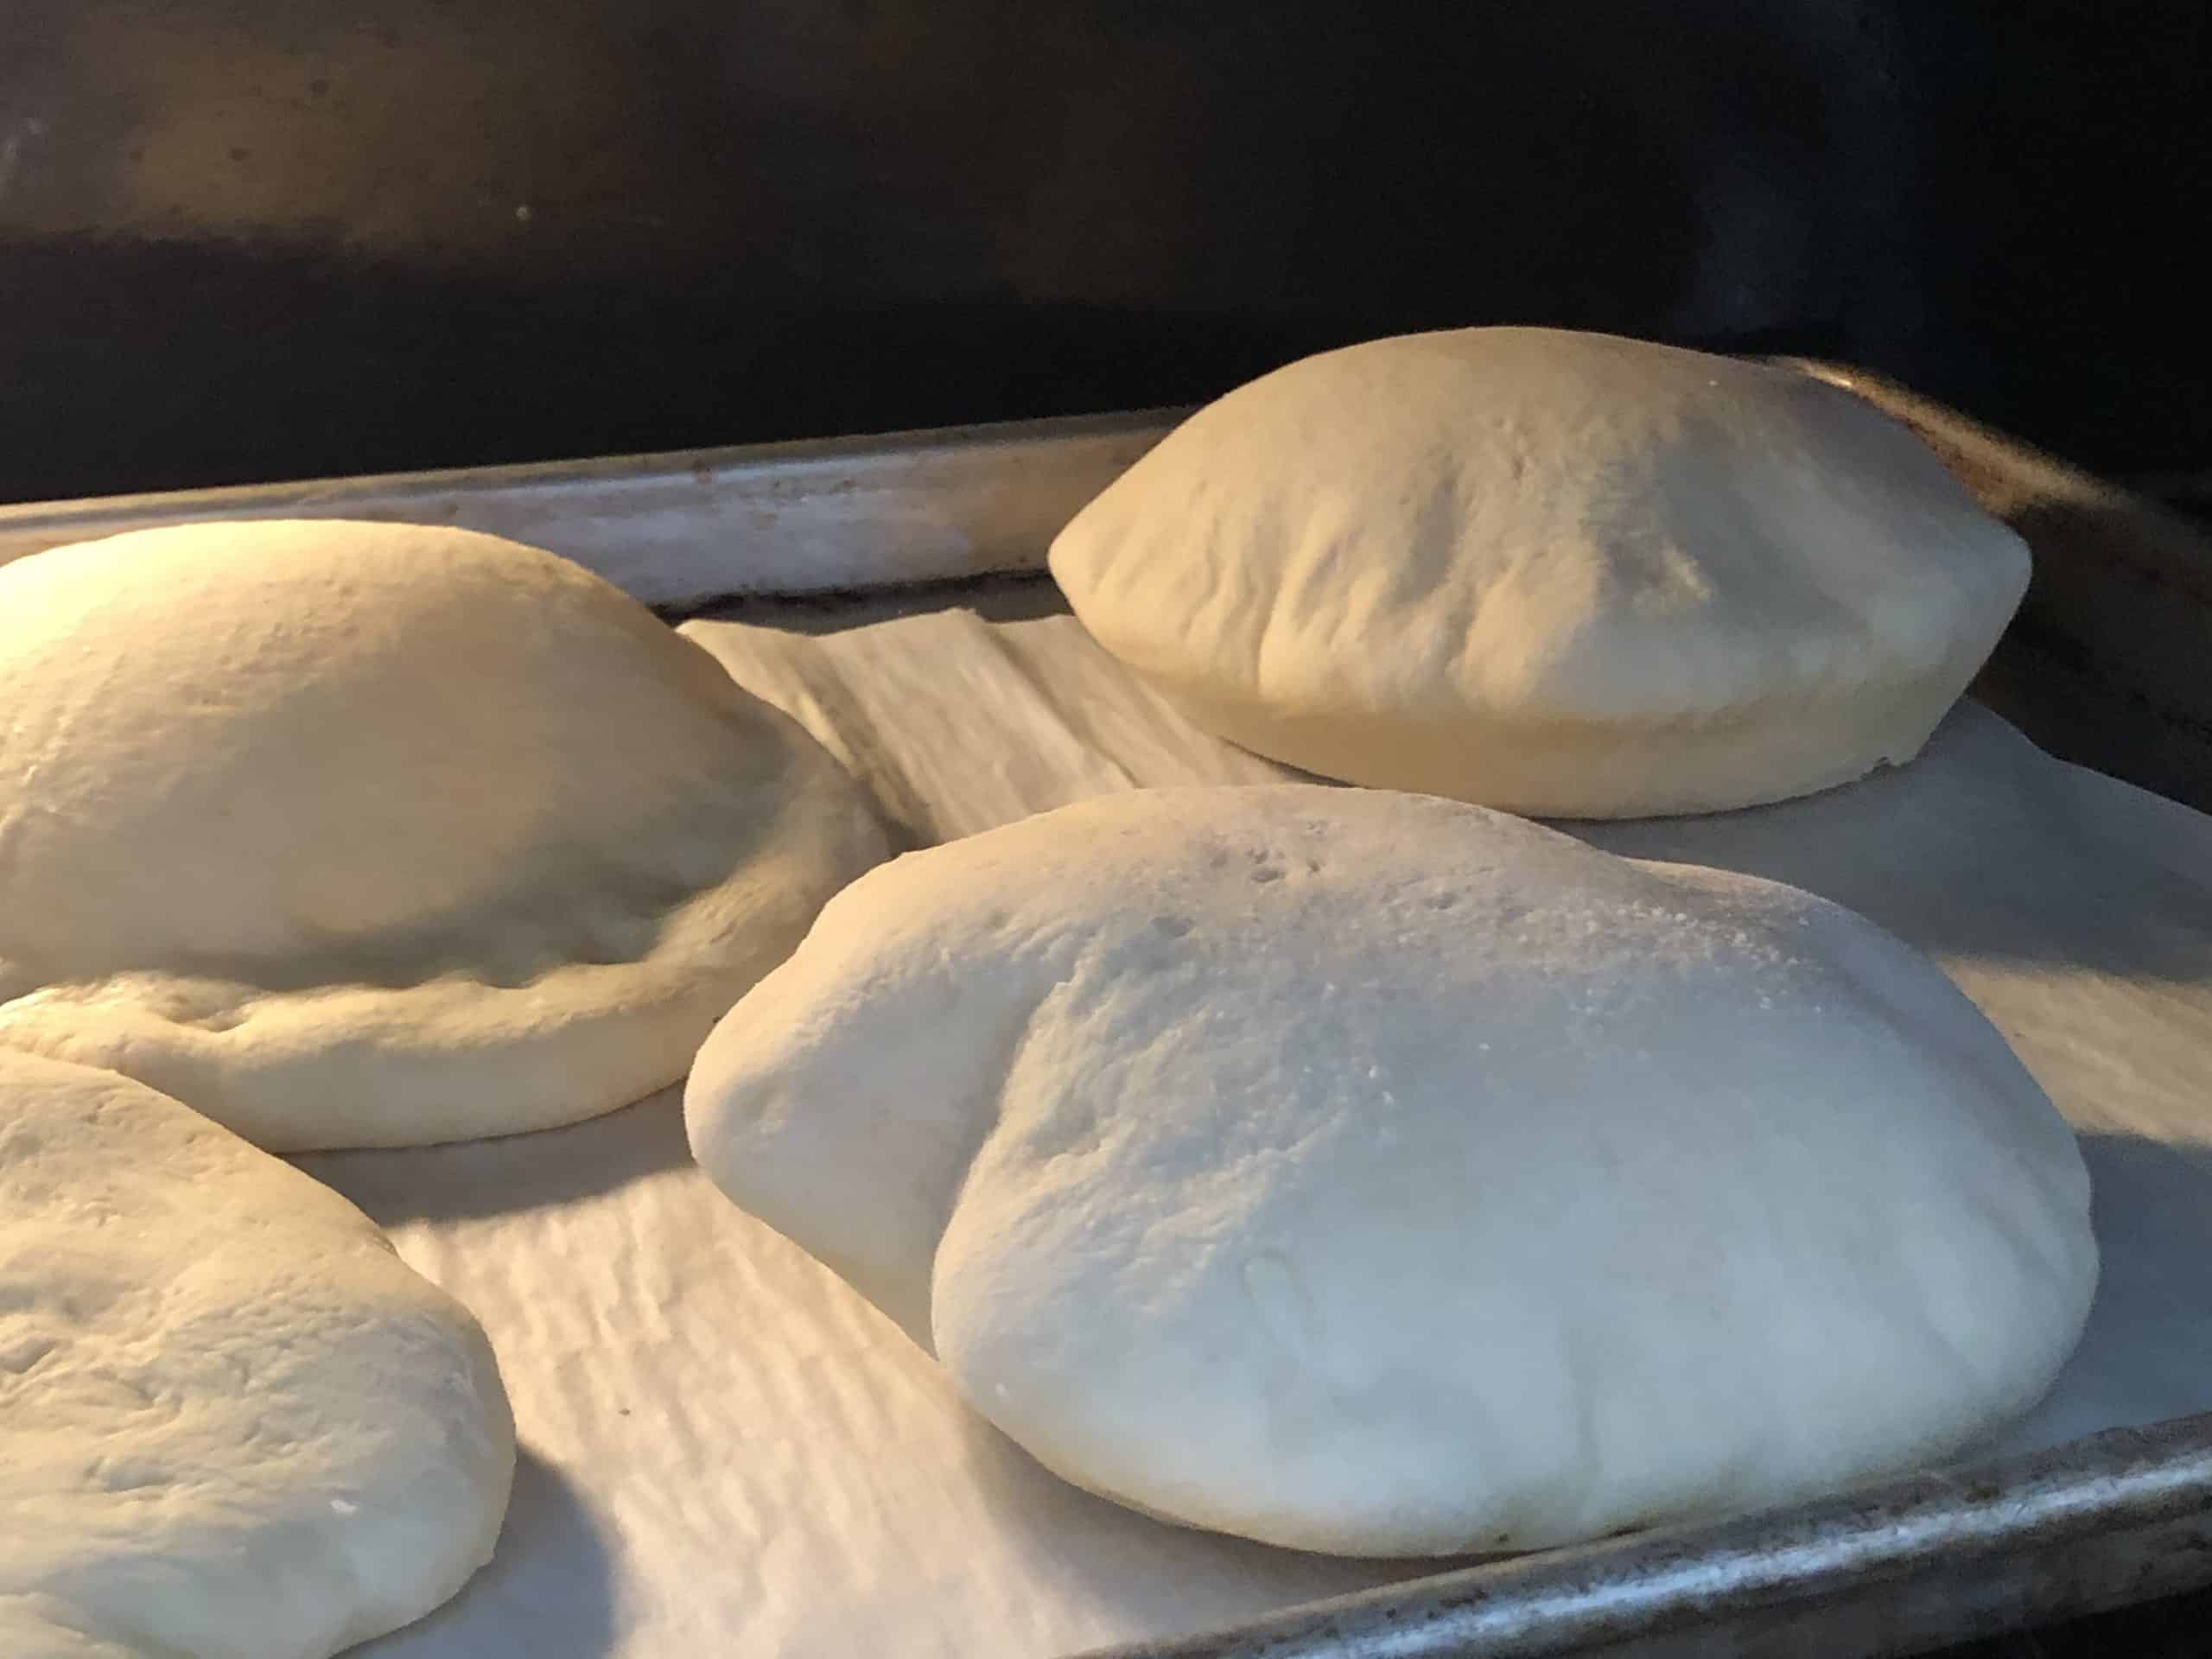 Puffed up pita pockets baking in the oven.